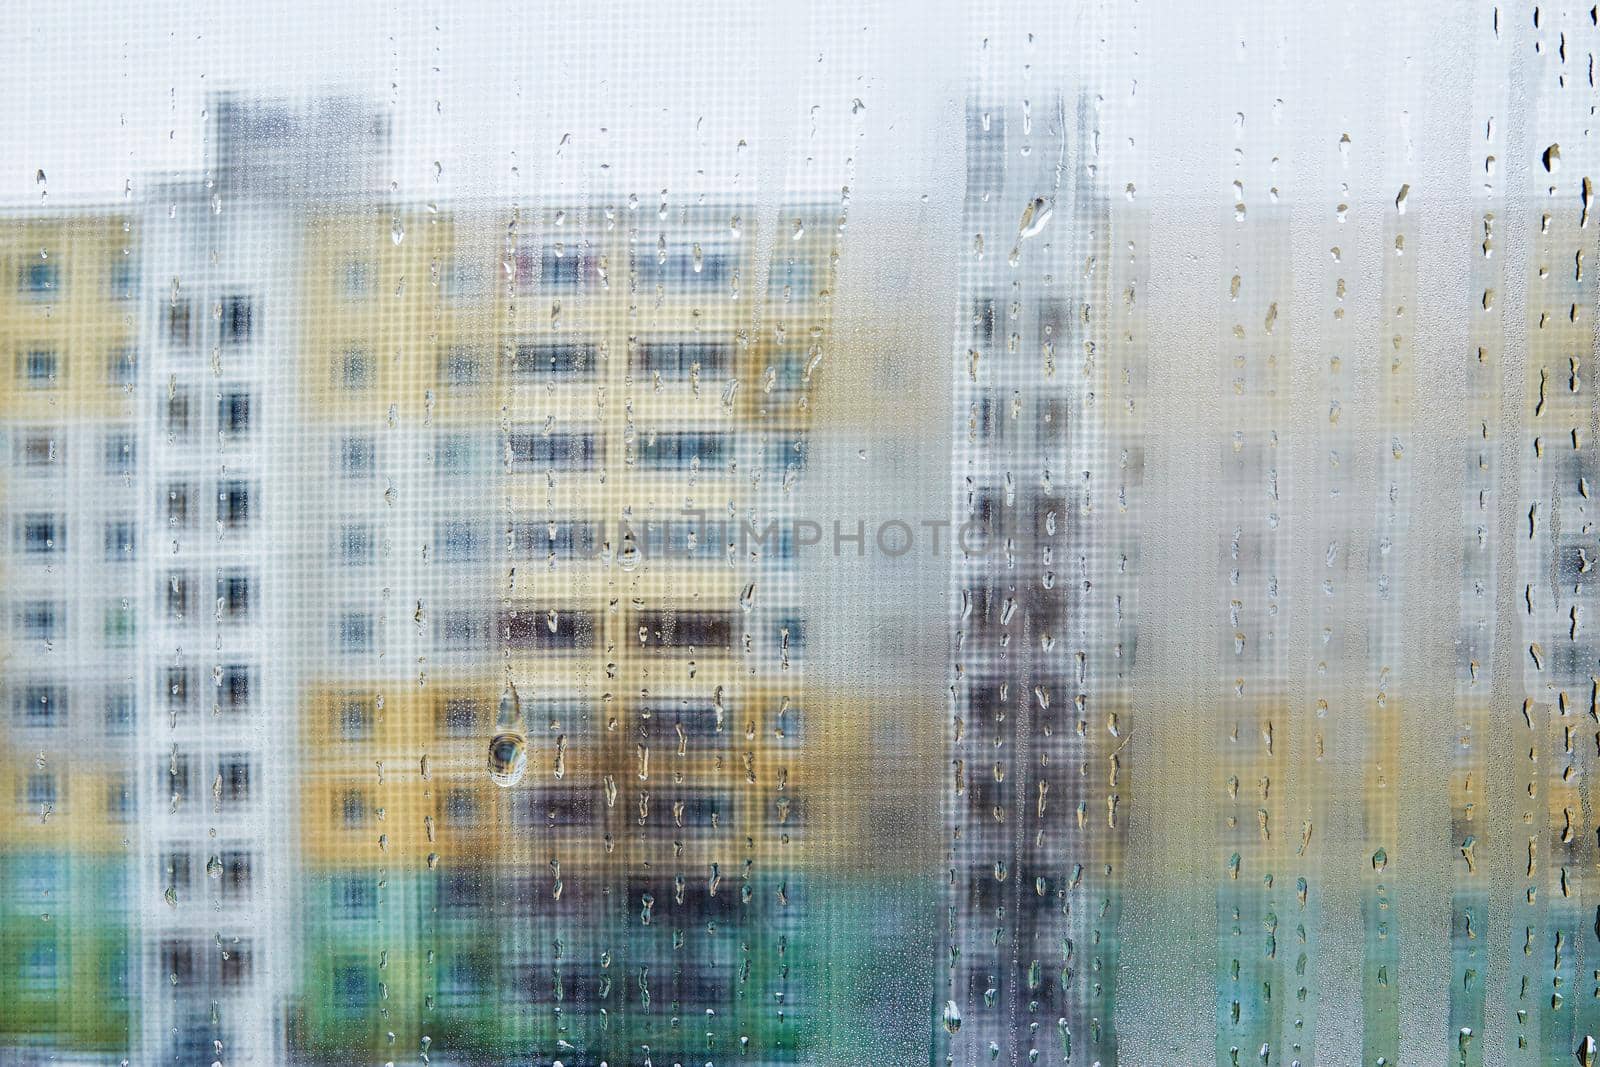 View of city houses through a fogged window close-up